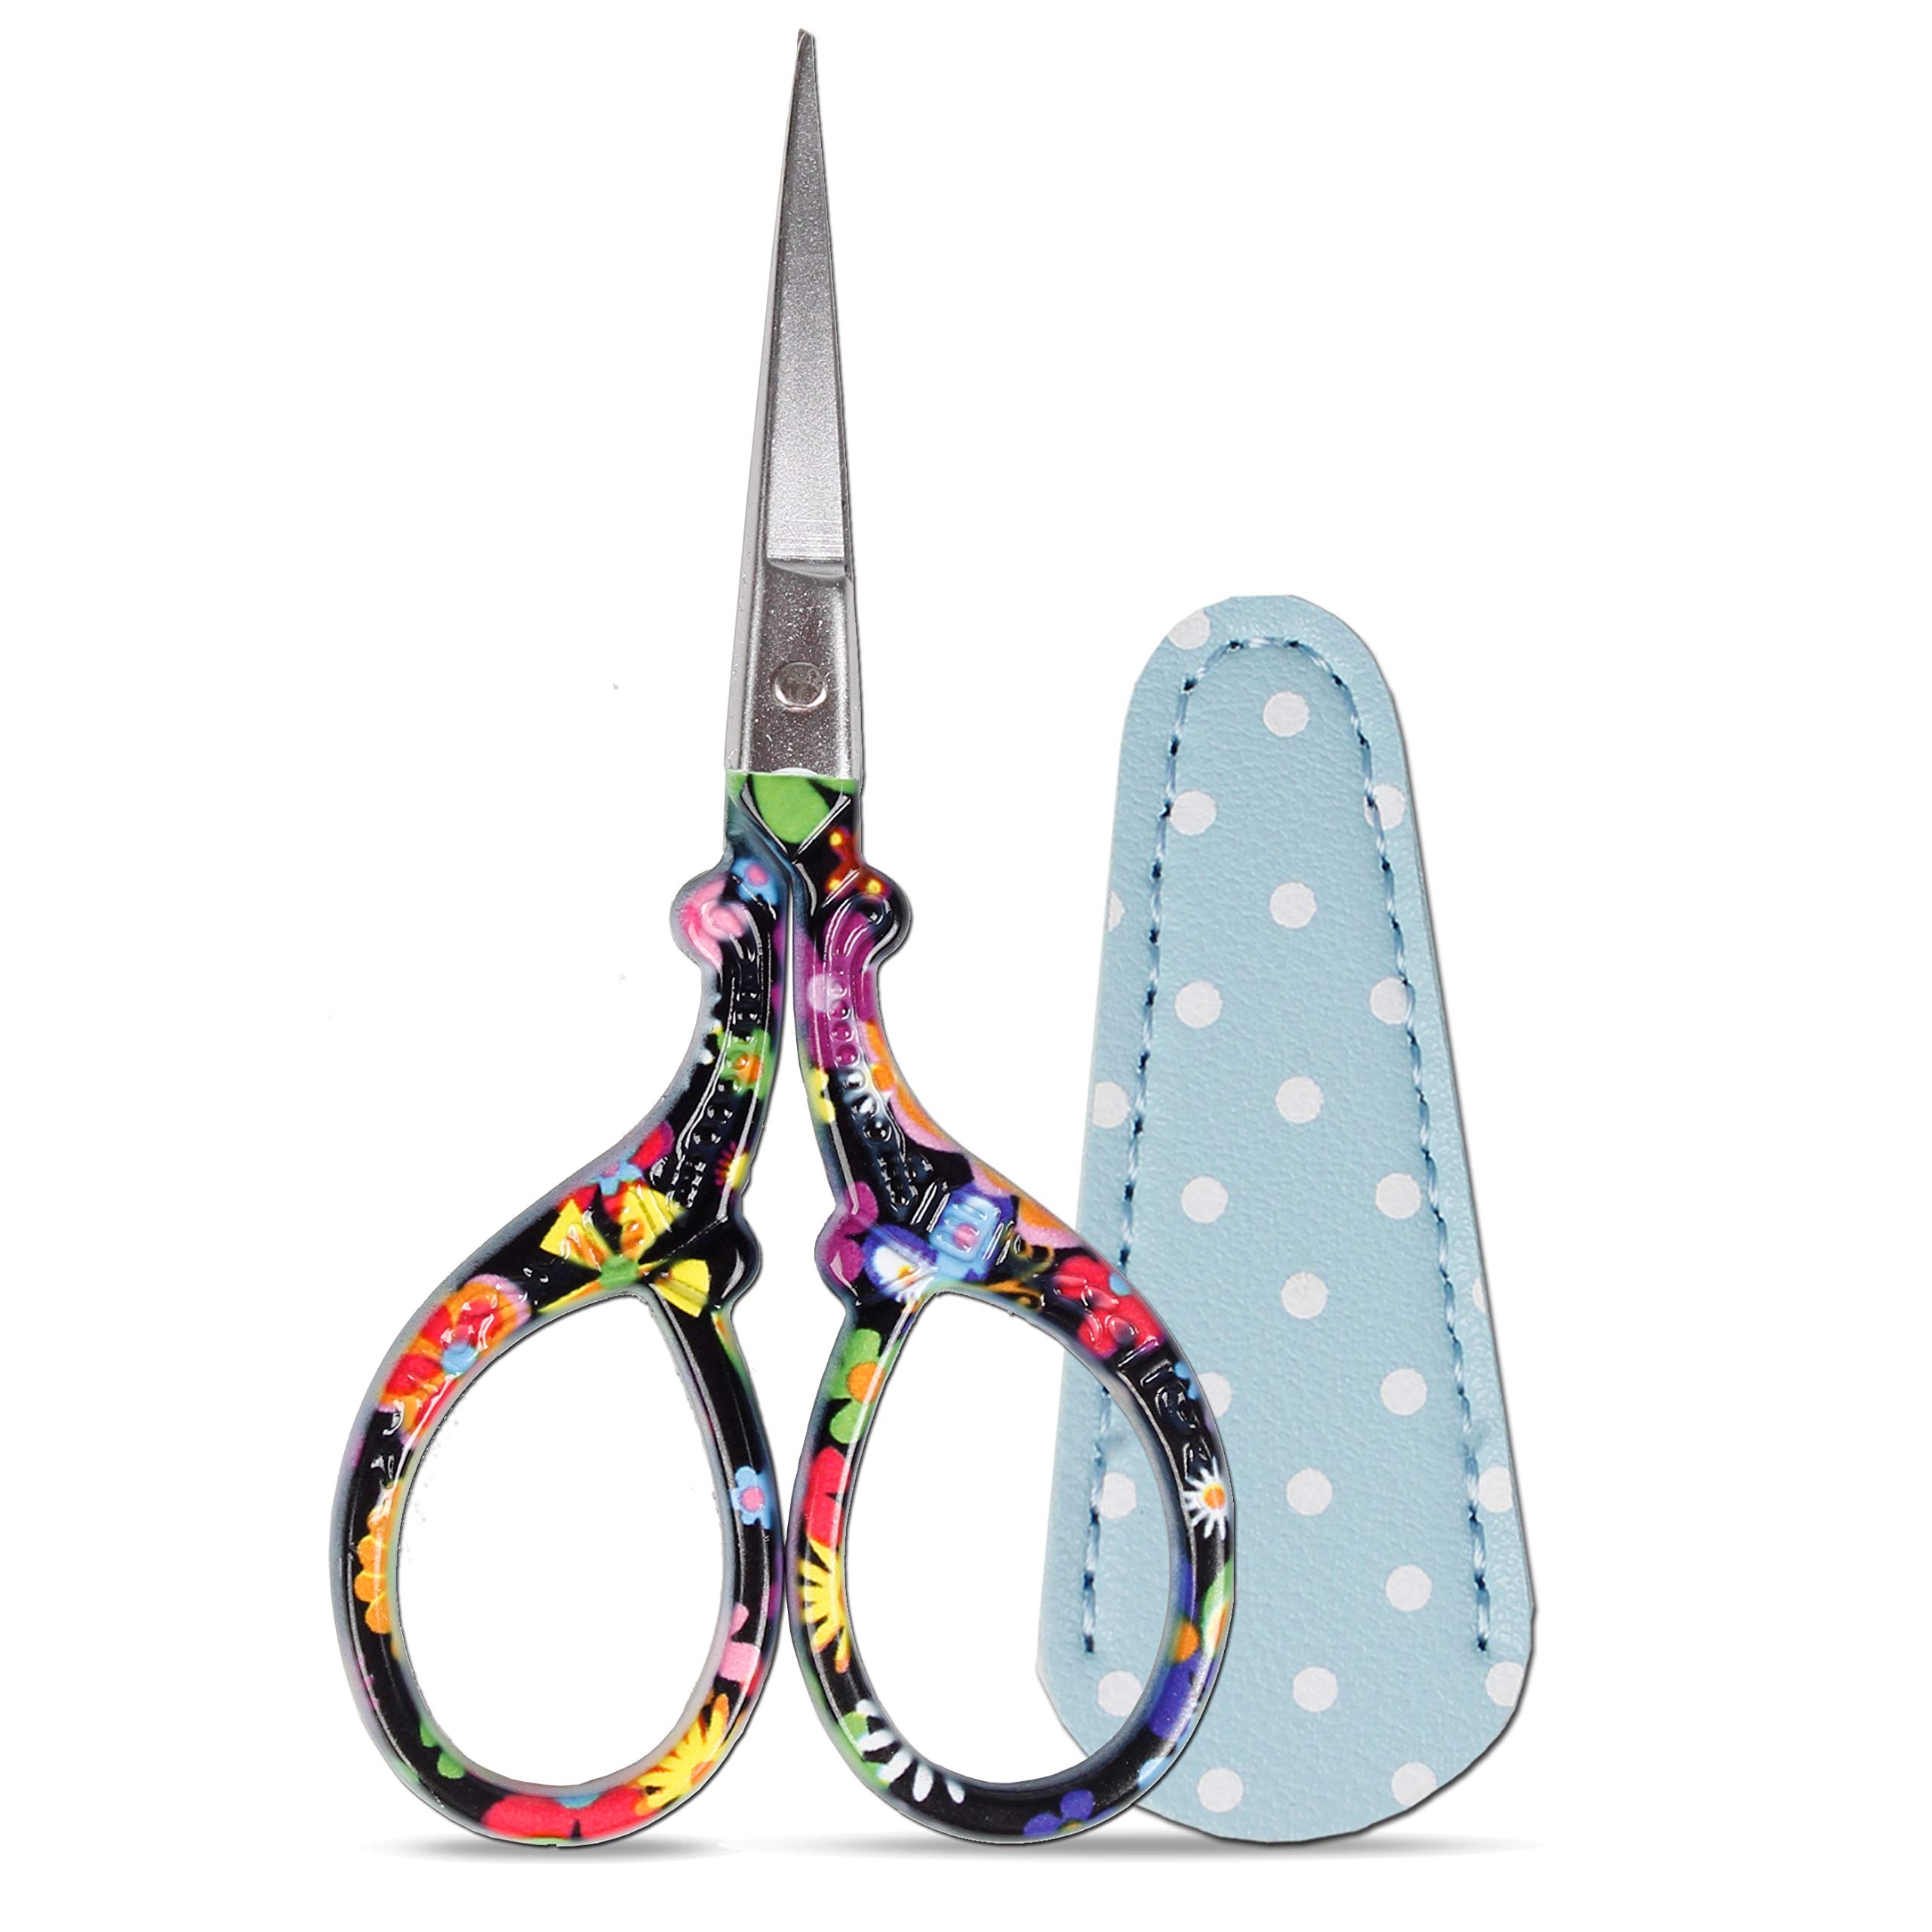 Creativ Mini/Fine Embroidery Scissors Sewing Crafts Small - Very Sharp  Point - Needlework Office Crafts Black